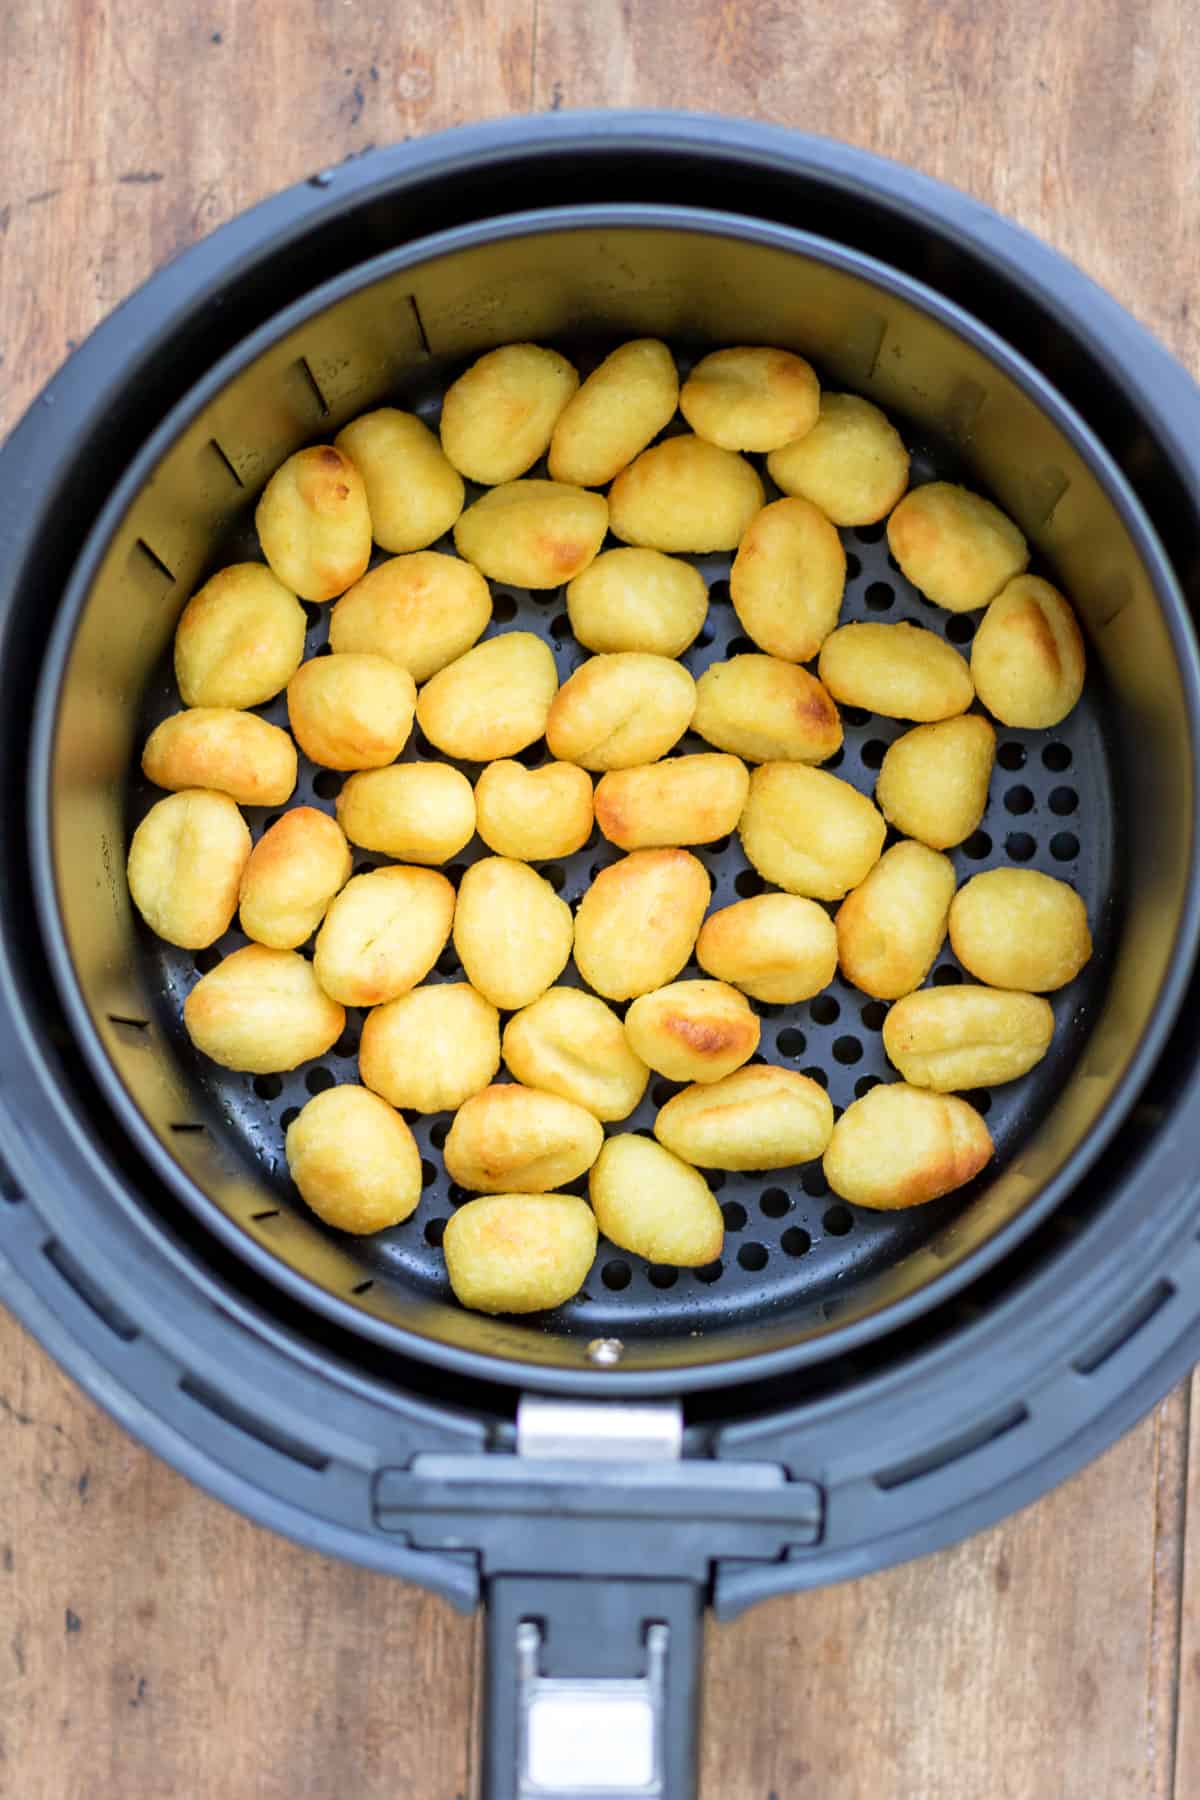 Cooked gnocchi in air fryer basket.